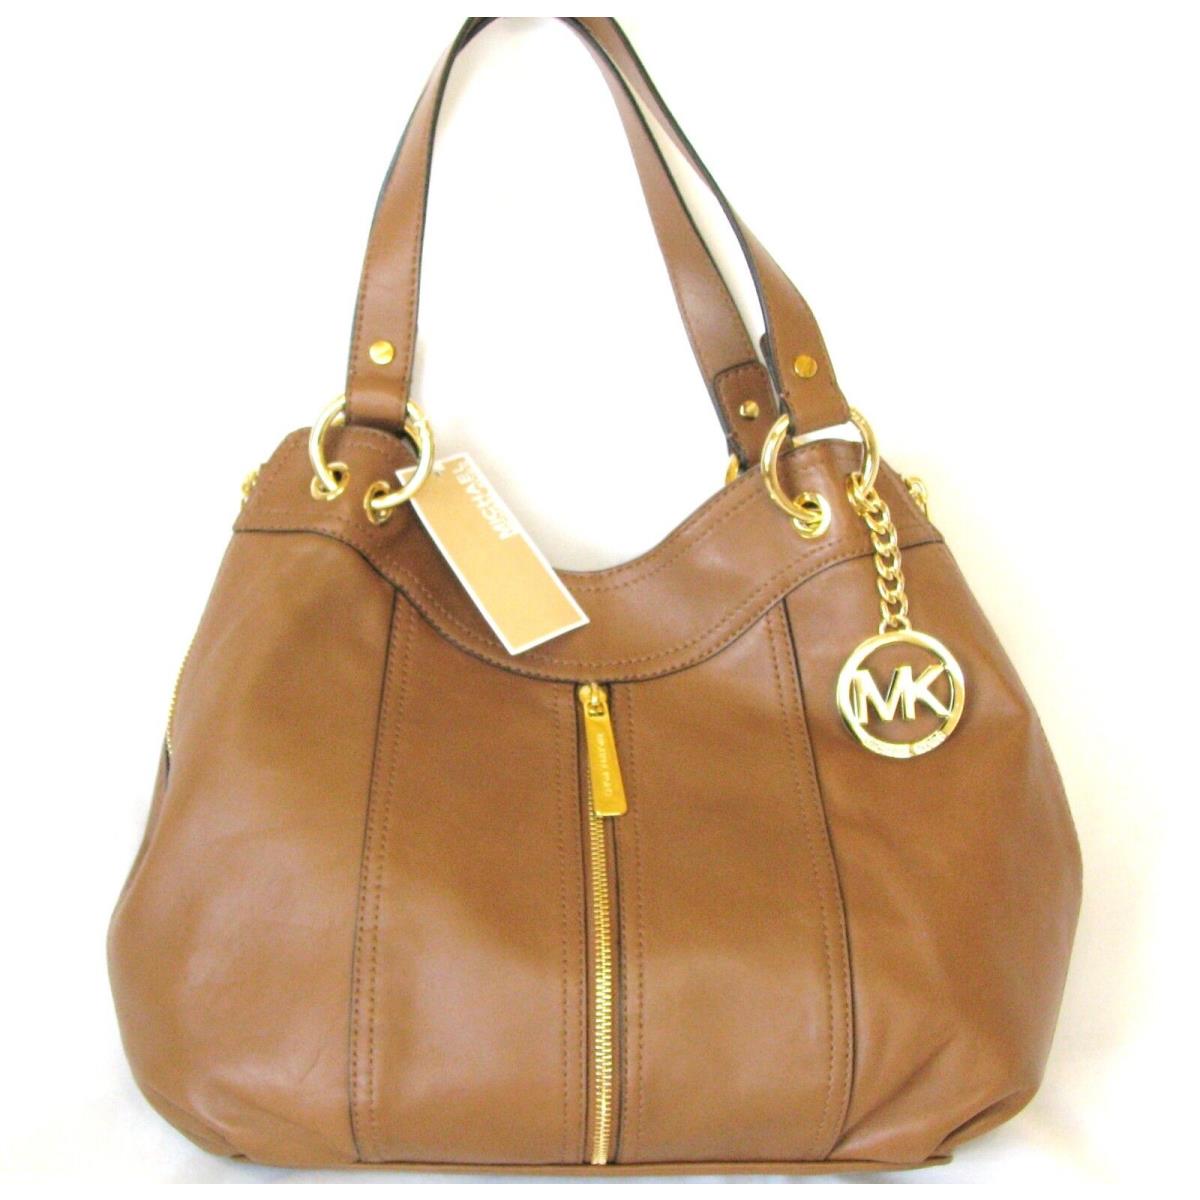 New-michael Kors MD Moxley Luggage Brown Leather Tote Purse Shoulder+hand Bag